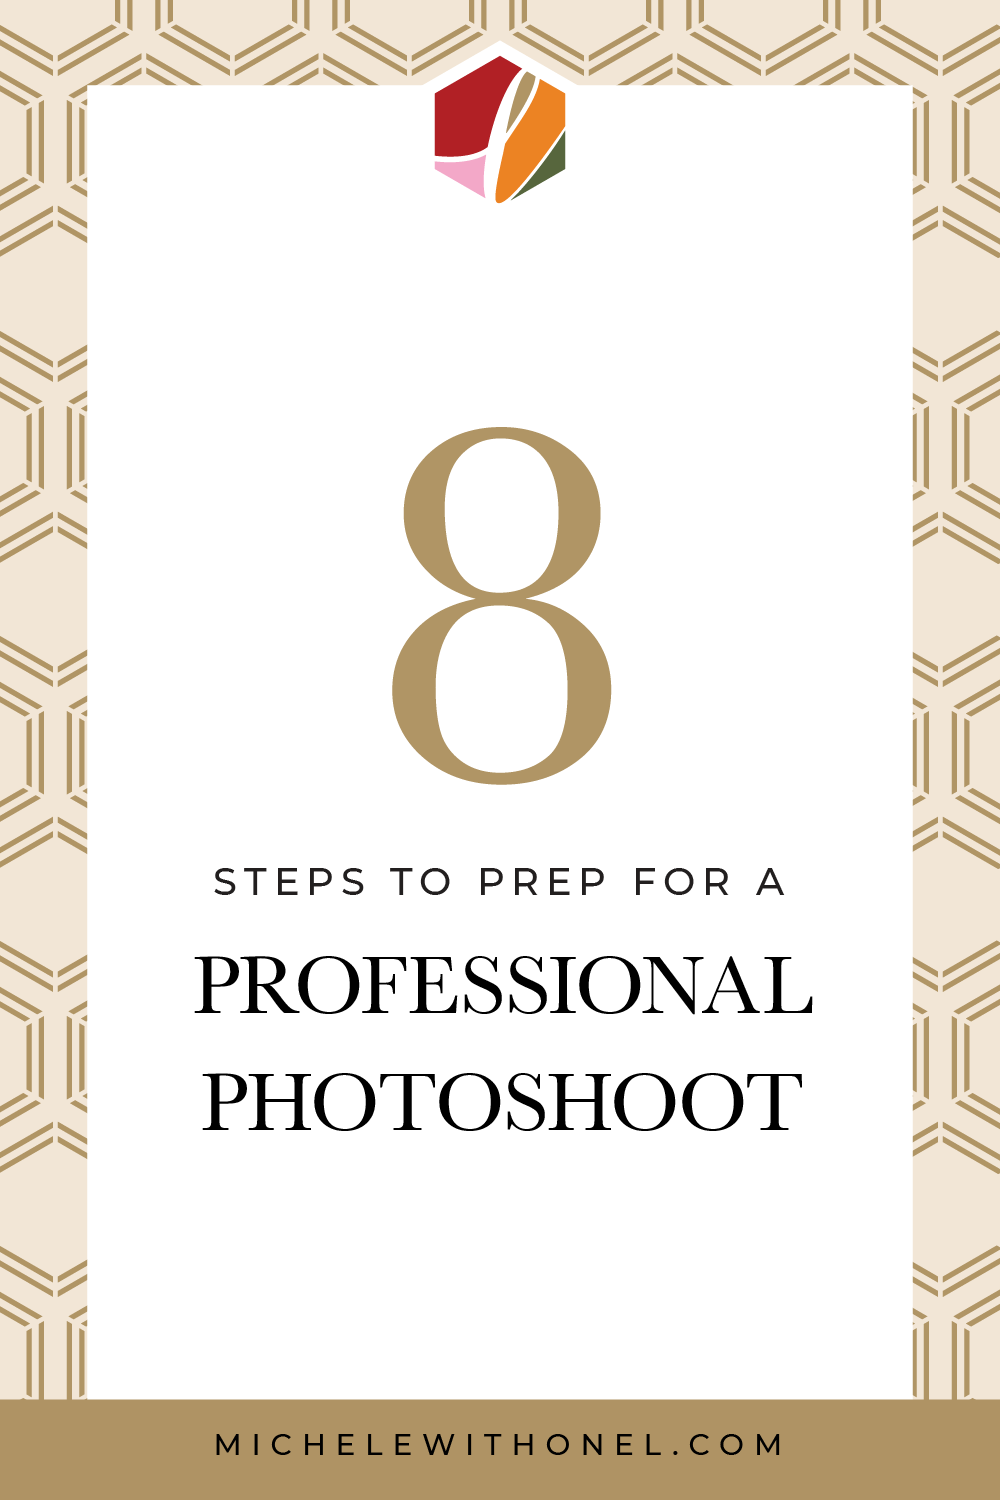 Need some help planning a photoshoot? This post is for you! Prep for your brand photography session in 8 steps—including choosing a location, selecting your wardrobe, and scheduling hair and makeup. You’ll be well prepared for your professional photoshoot after reading this! #branding #photography #business #headshots